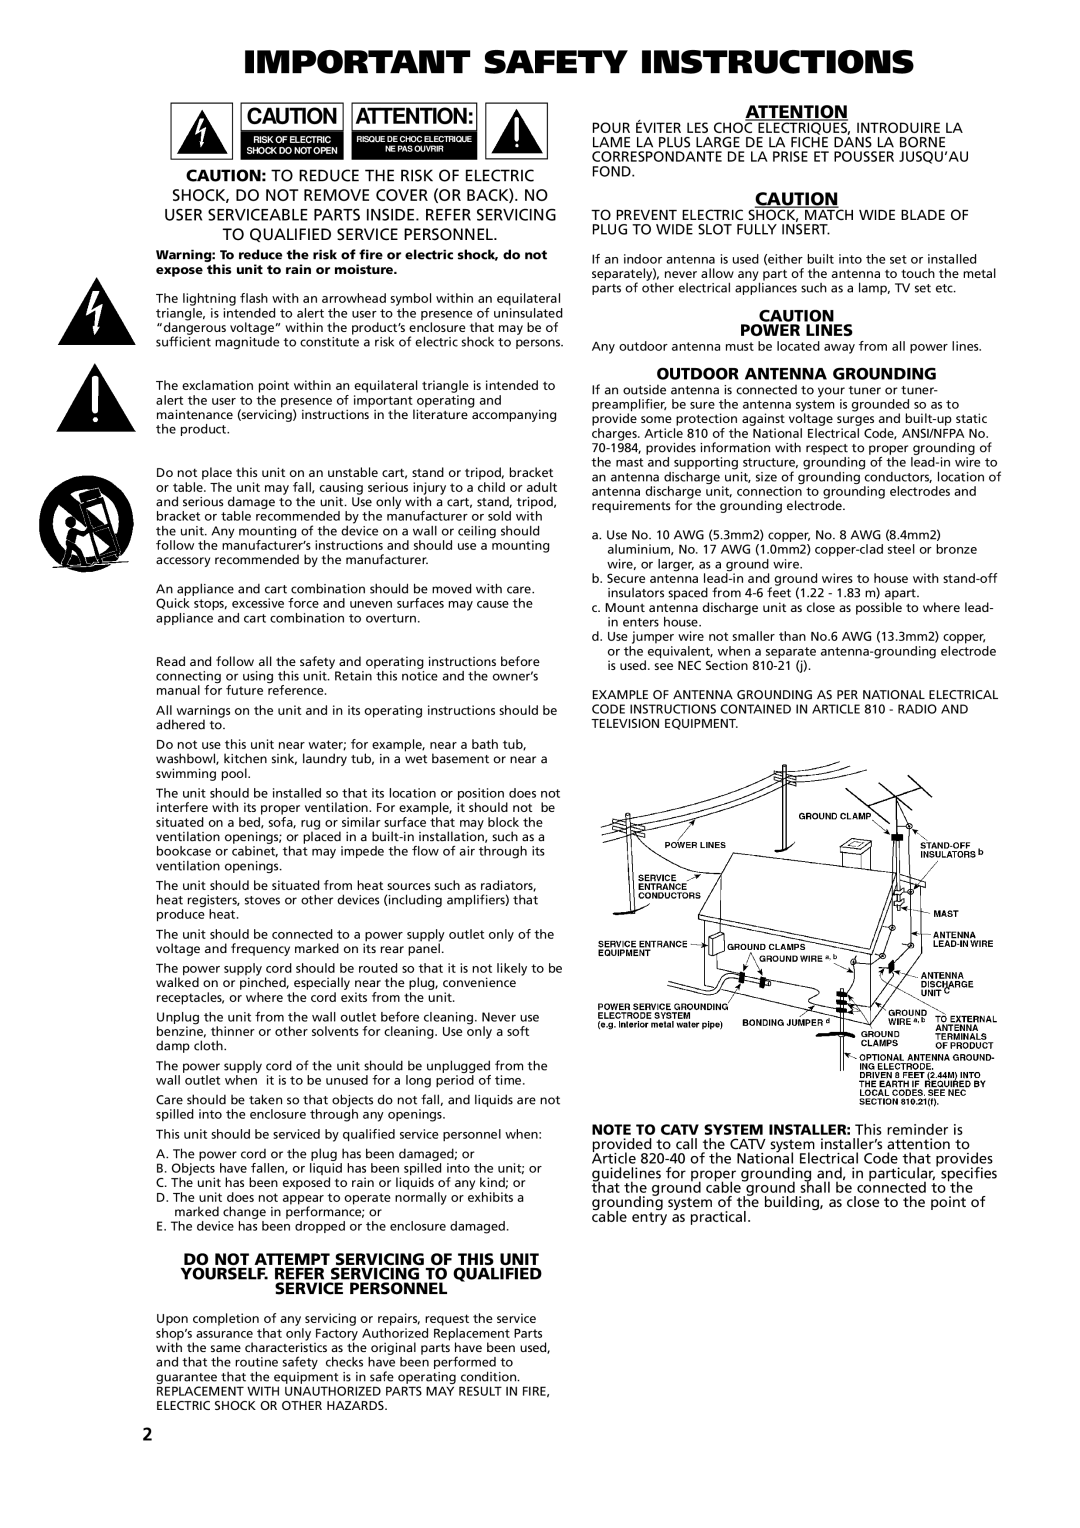 NAD S500 owner manual Important Safety Instructions, Power Lines, Outdoor Antenna Grounding 